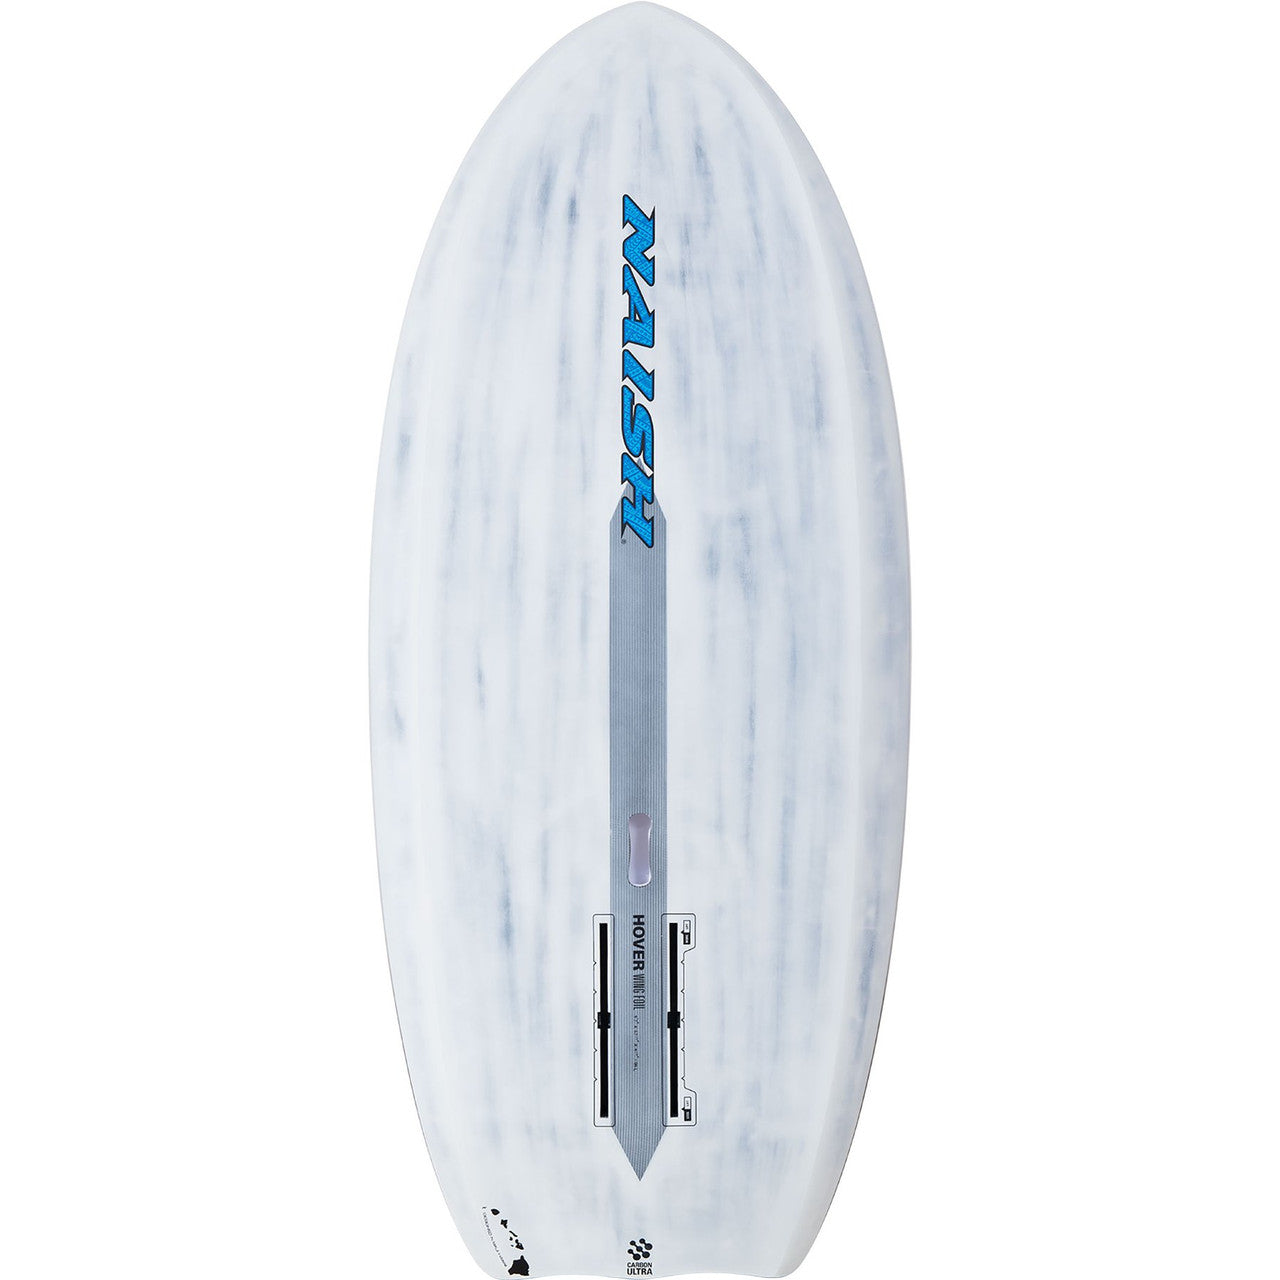 Naish Hover Wing Foil Carbon Ultra  Wing-Surfing/Foil SUP 140 Liter